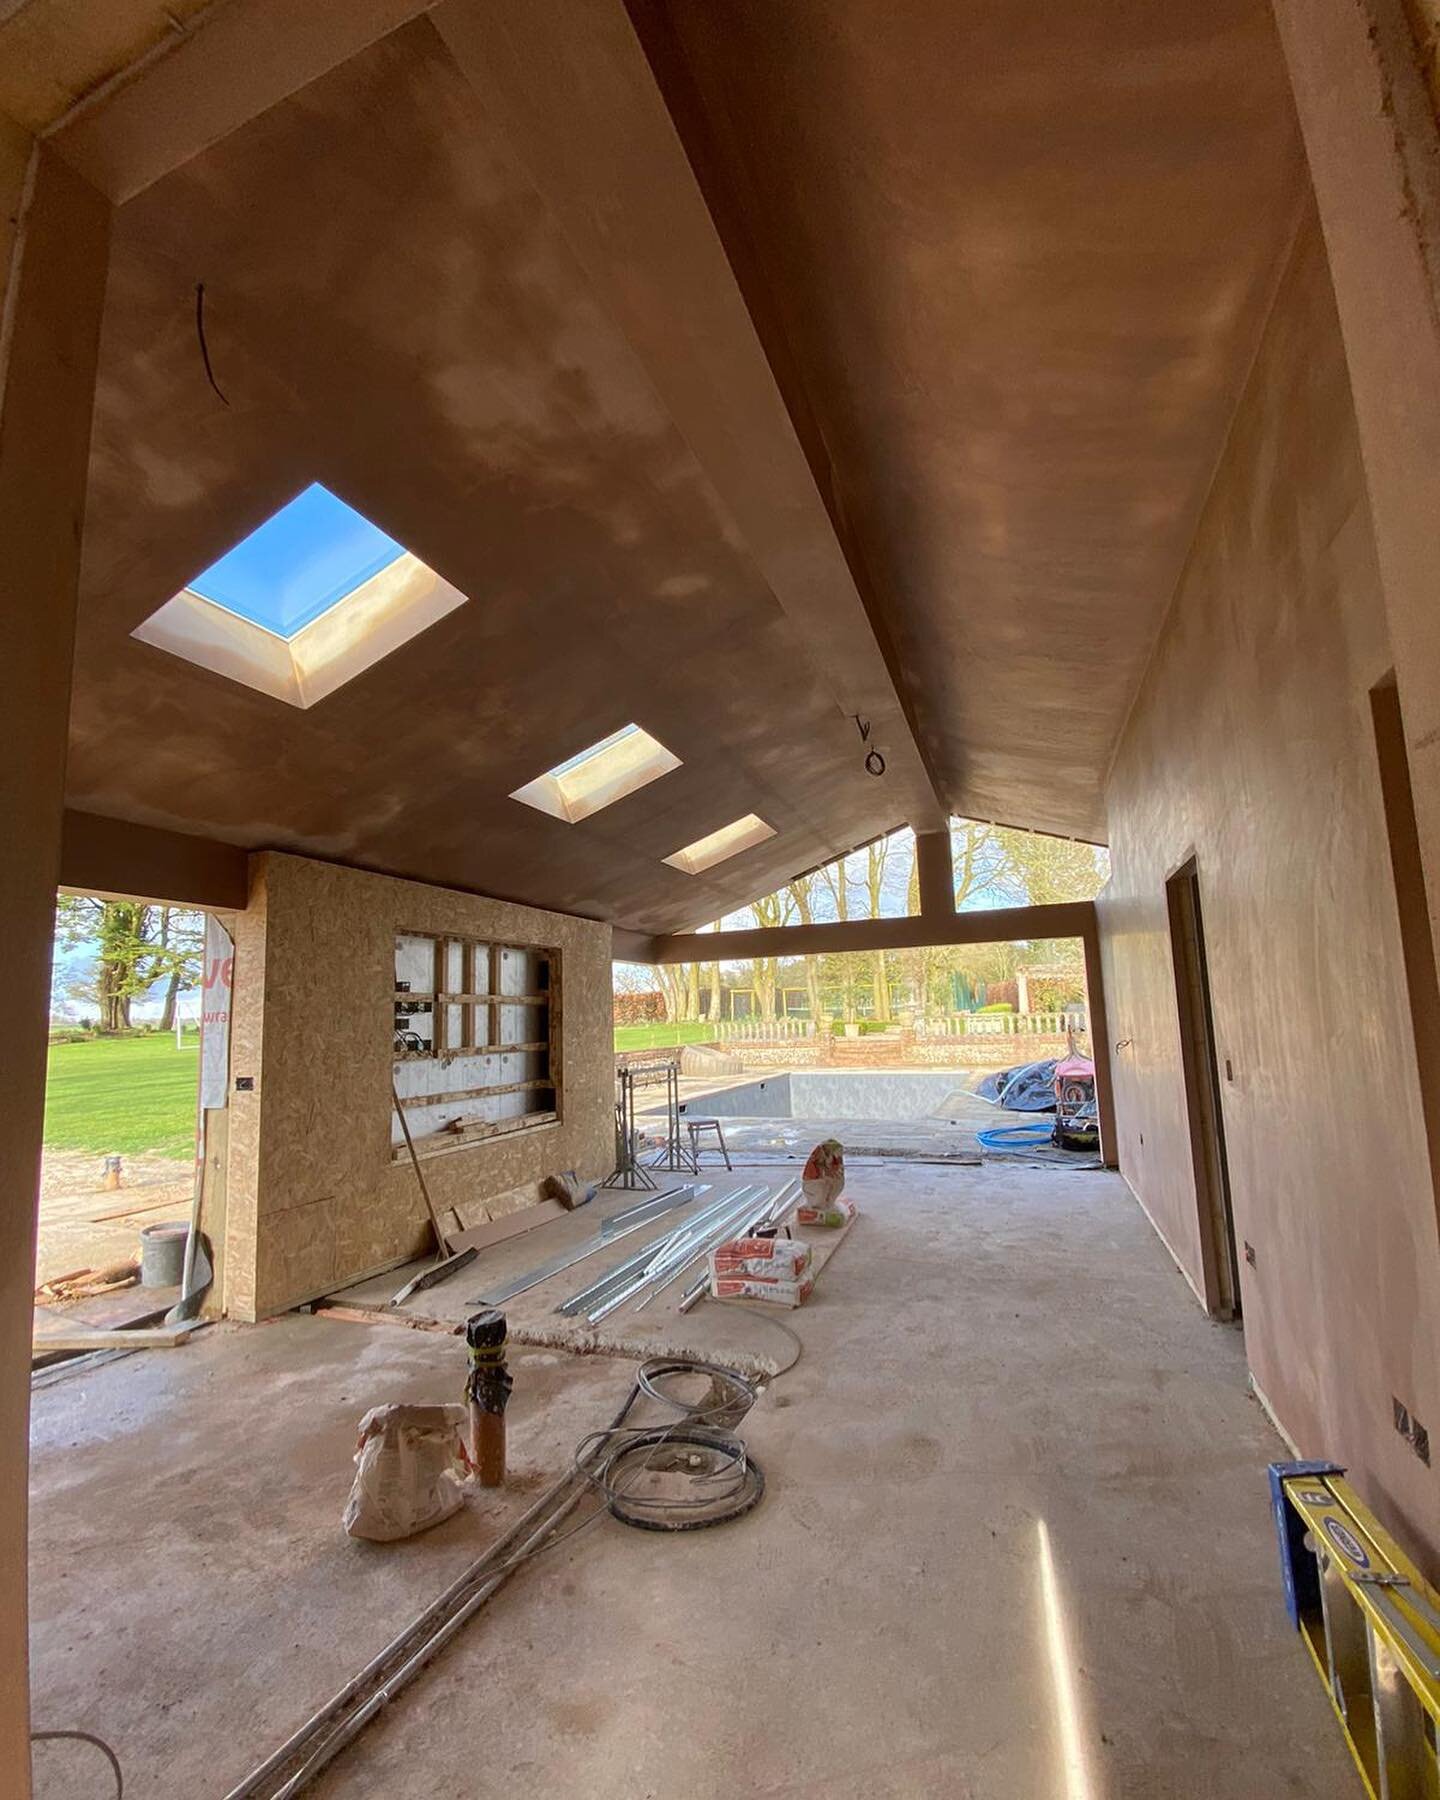 Let the sun spread ☀️there was sunshine today and now there's plaster on the walls.  Looking forward to @origin_global doors and windows next week 🏡

#outbuilding #guesthouse #plaster #outdoorliving